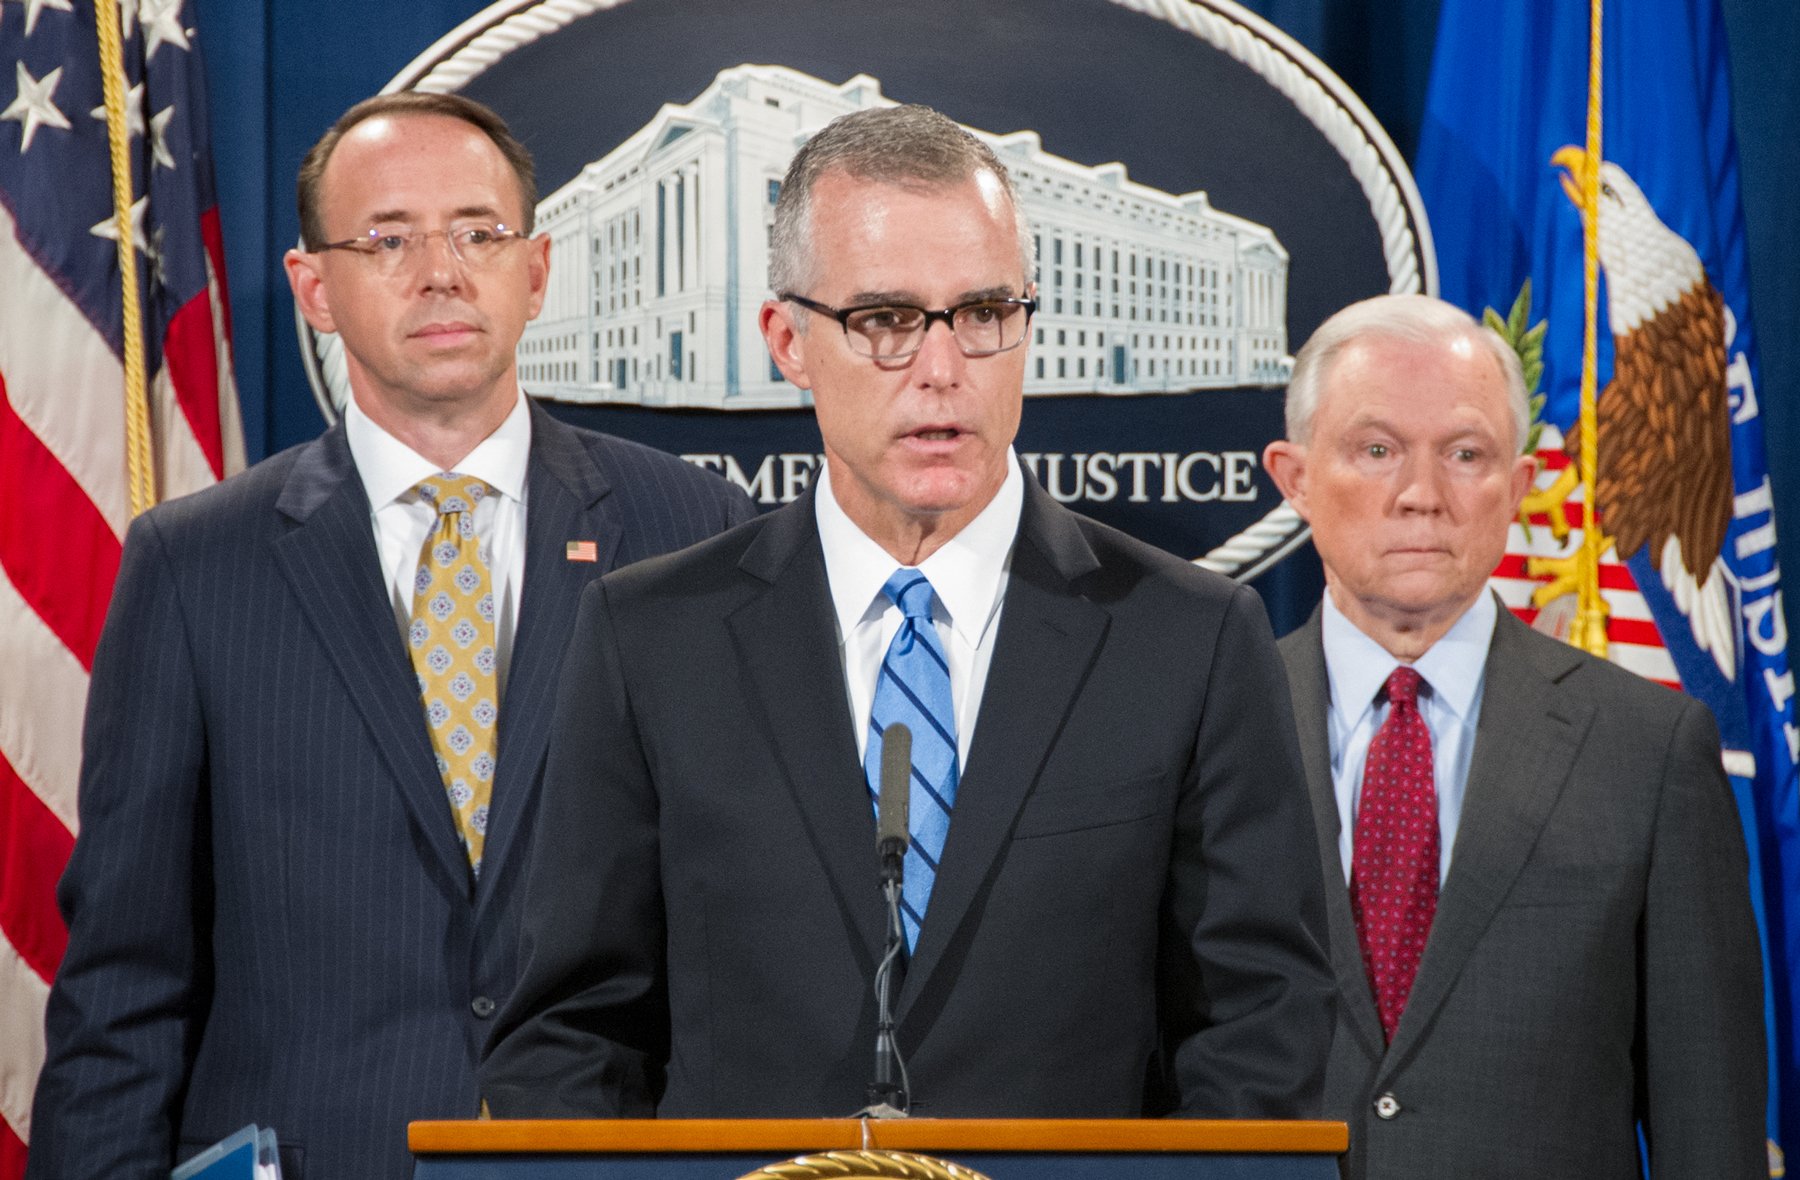 Law enforcement officials including FBI Acting Director Andrew McCabe, Attorney General Jeff Sessions, and Deputy Attorney General Rod Rosenstein announced the takedown of the online Darknet marketplace AlphaBay at a July 20, 2017 press conference at the Department of Justice in Washington, D.C.